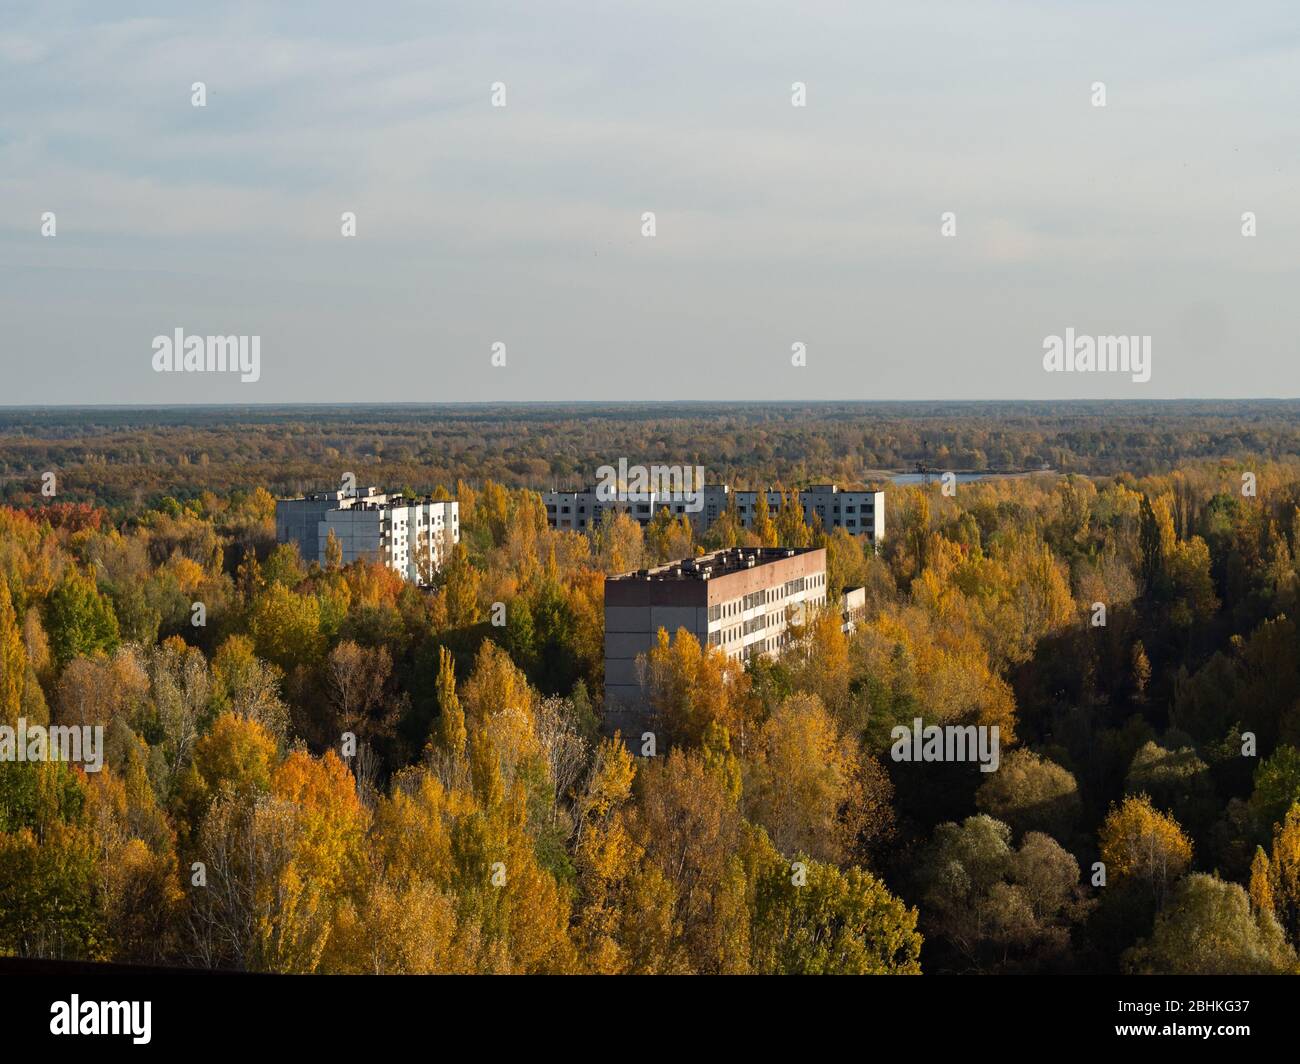 View from roof of ghost town Pripyat, post apocalyptic city, autumn season in Chernobyl exclusion zone, Ukraine Stock Photo